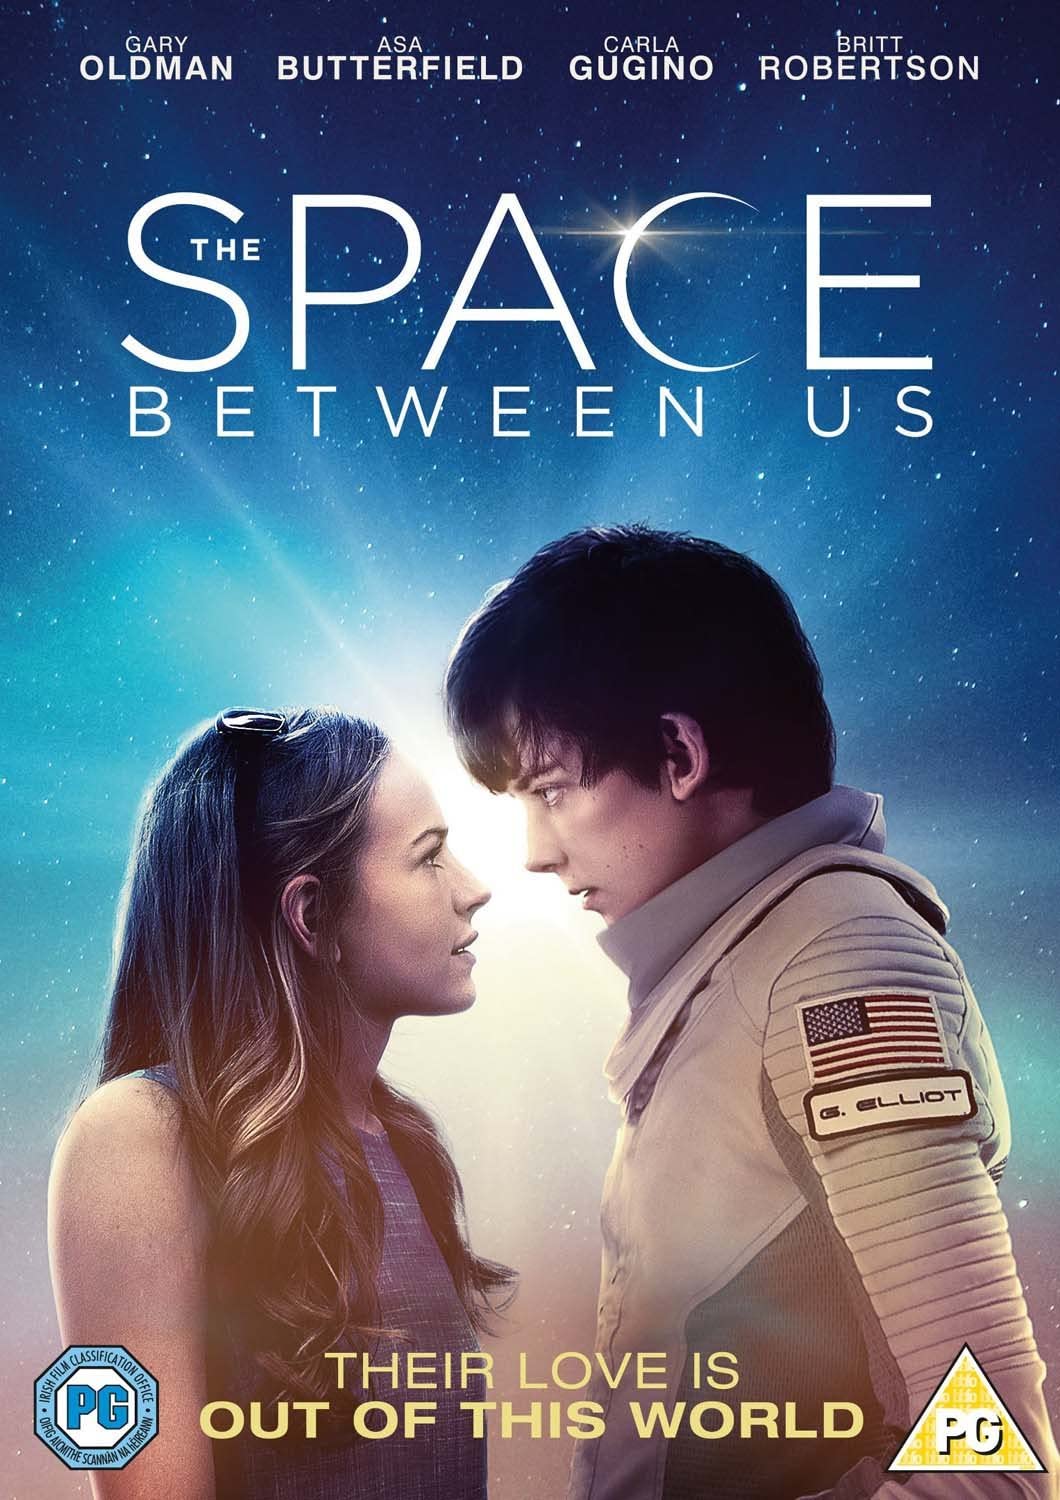 The Space Between Us [2017] - Sci-fi/Romance [DVD]